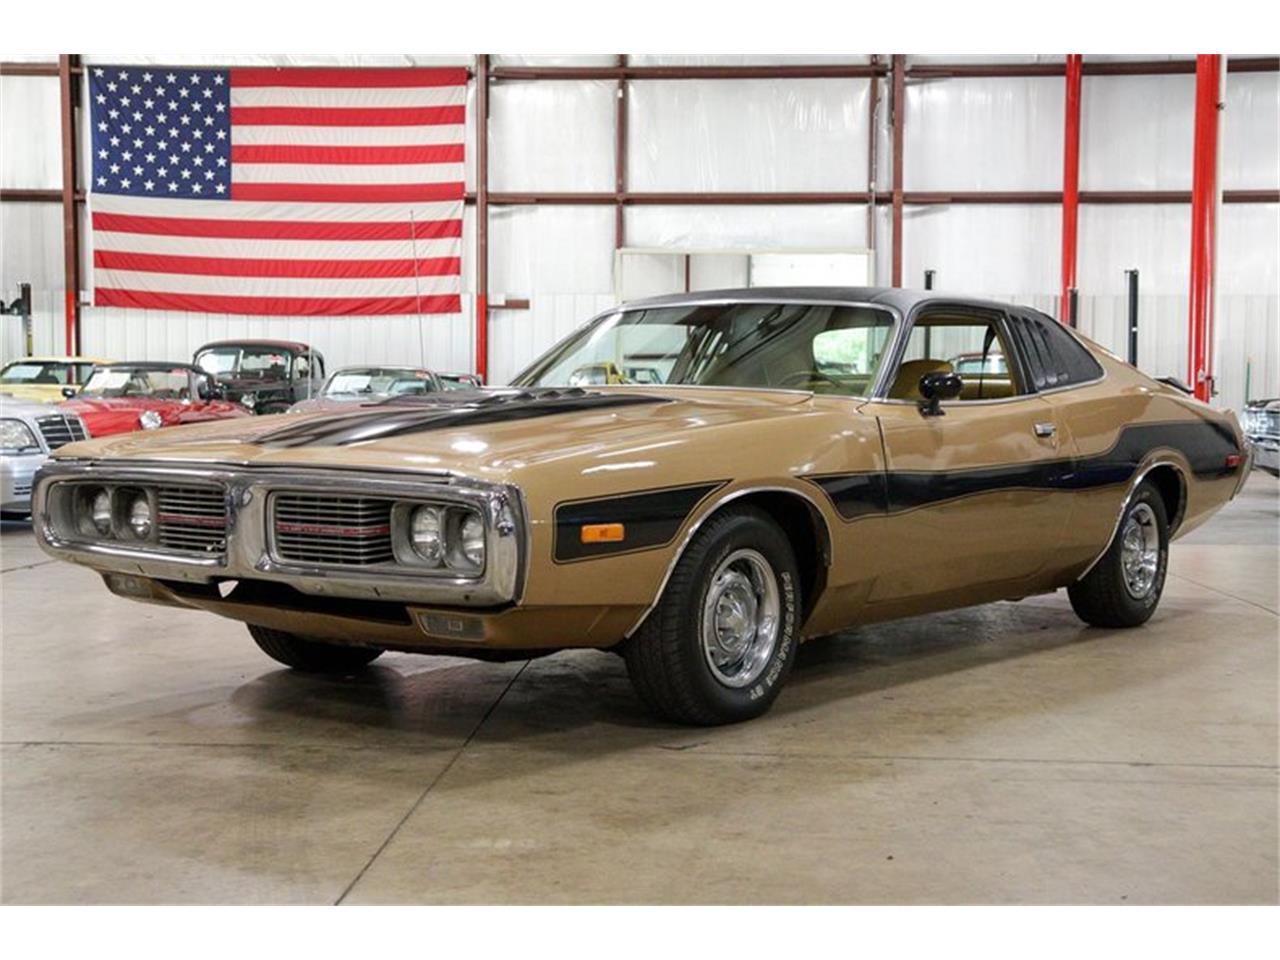 for sale 1973 dodge charger in kentwood, michigan cars - grand rapids, mi at geebo